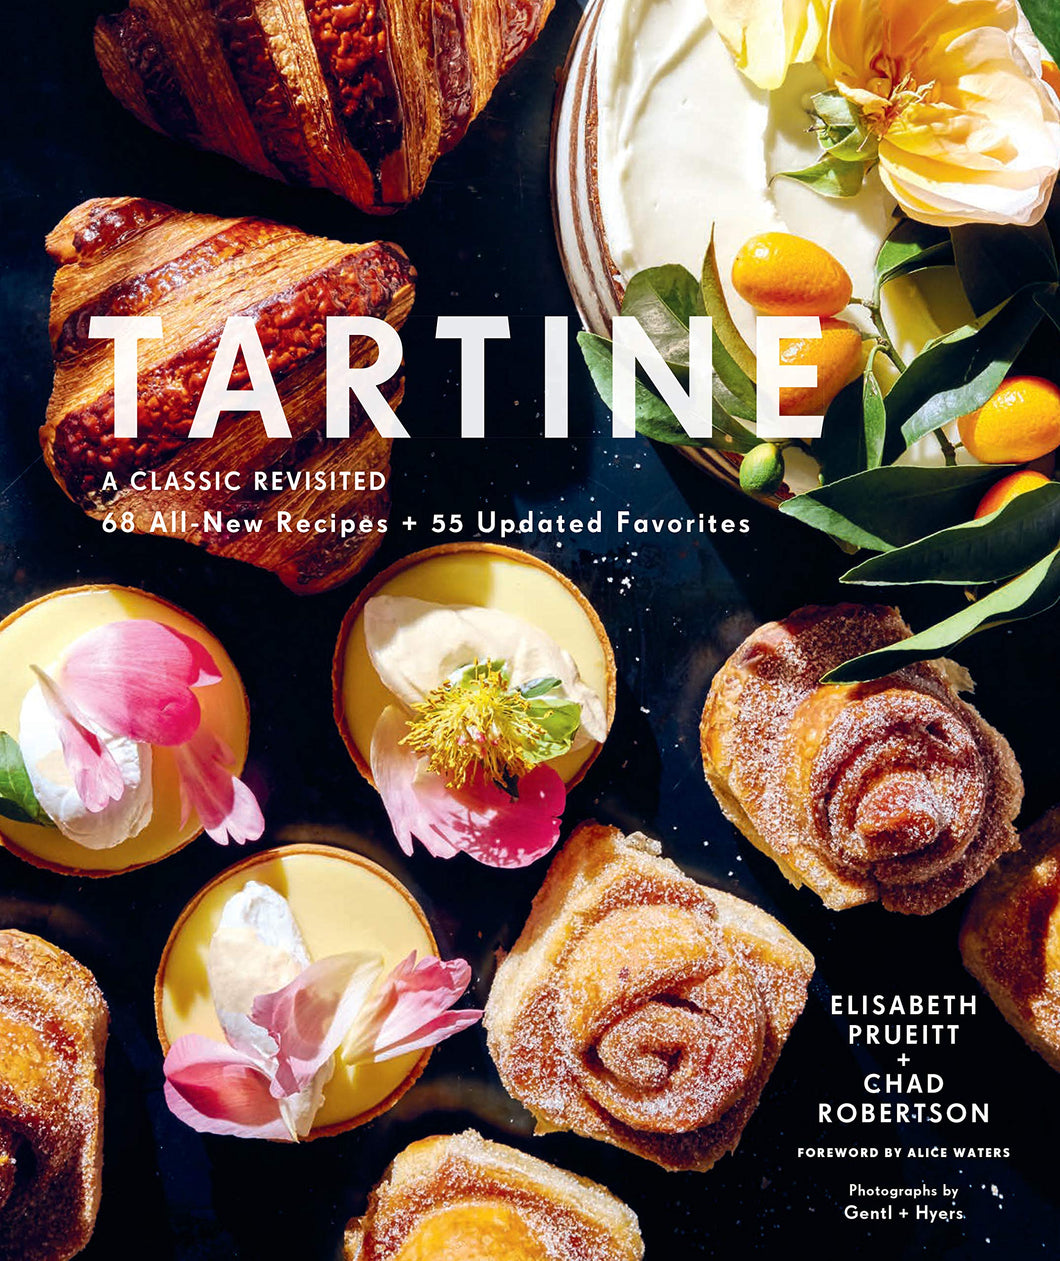 Tartine A classic revisited